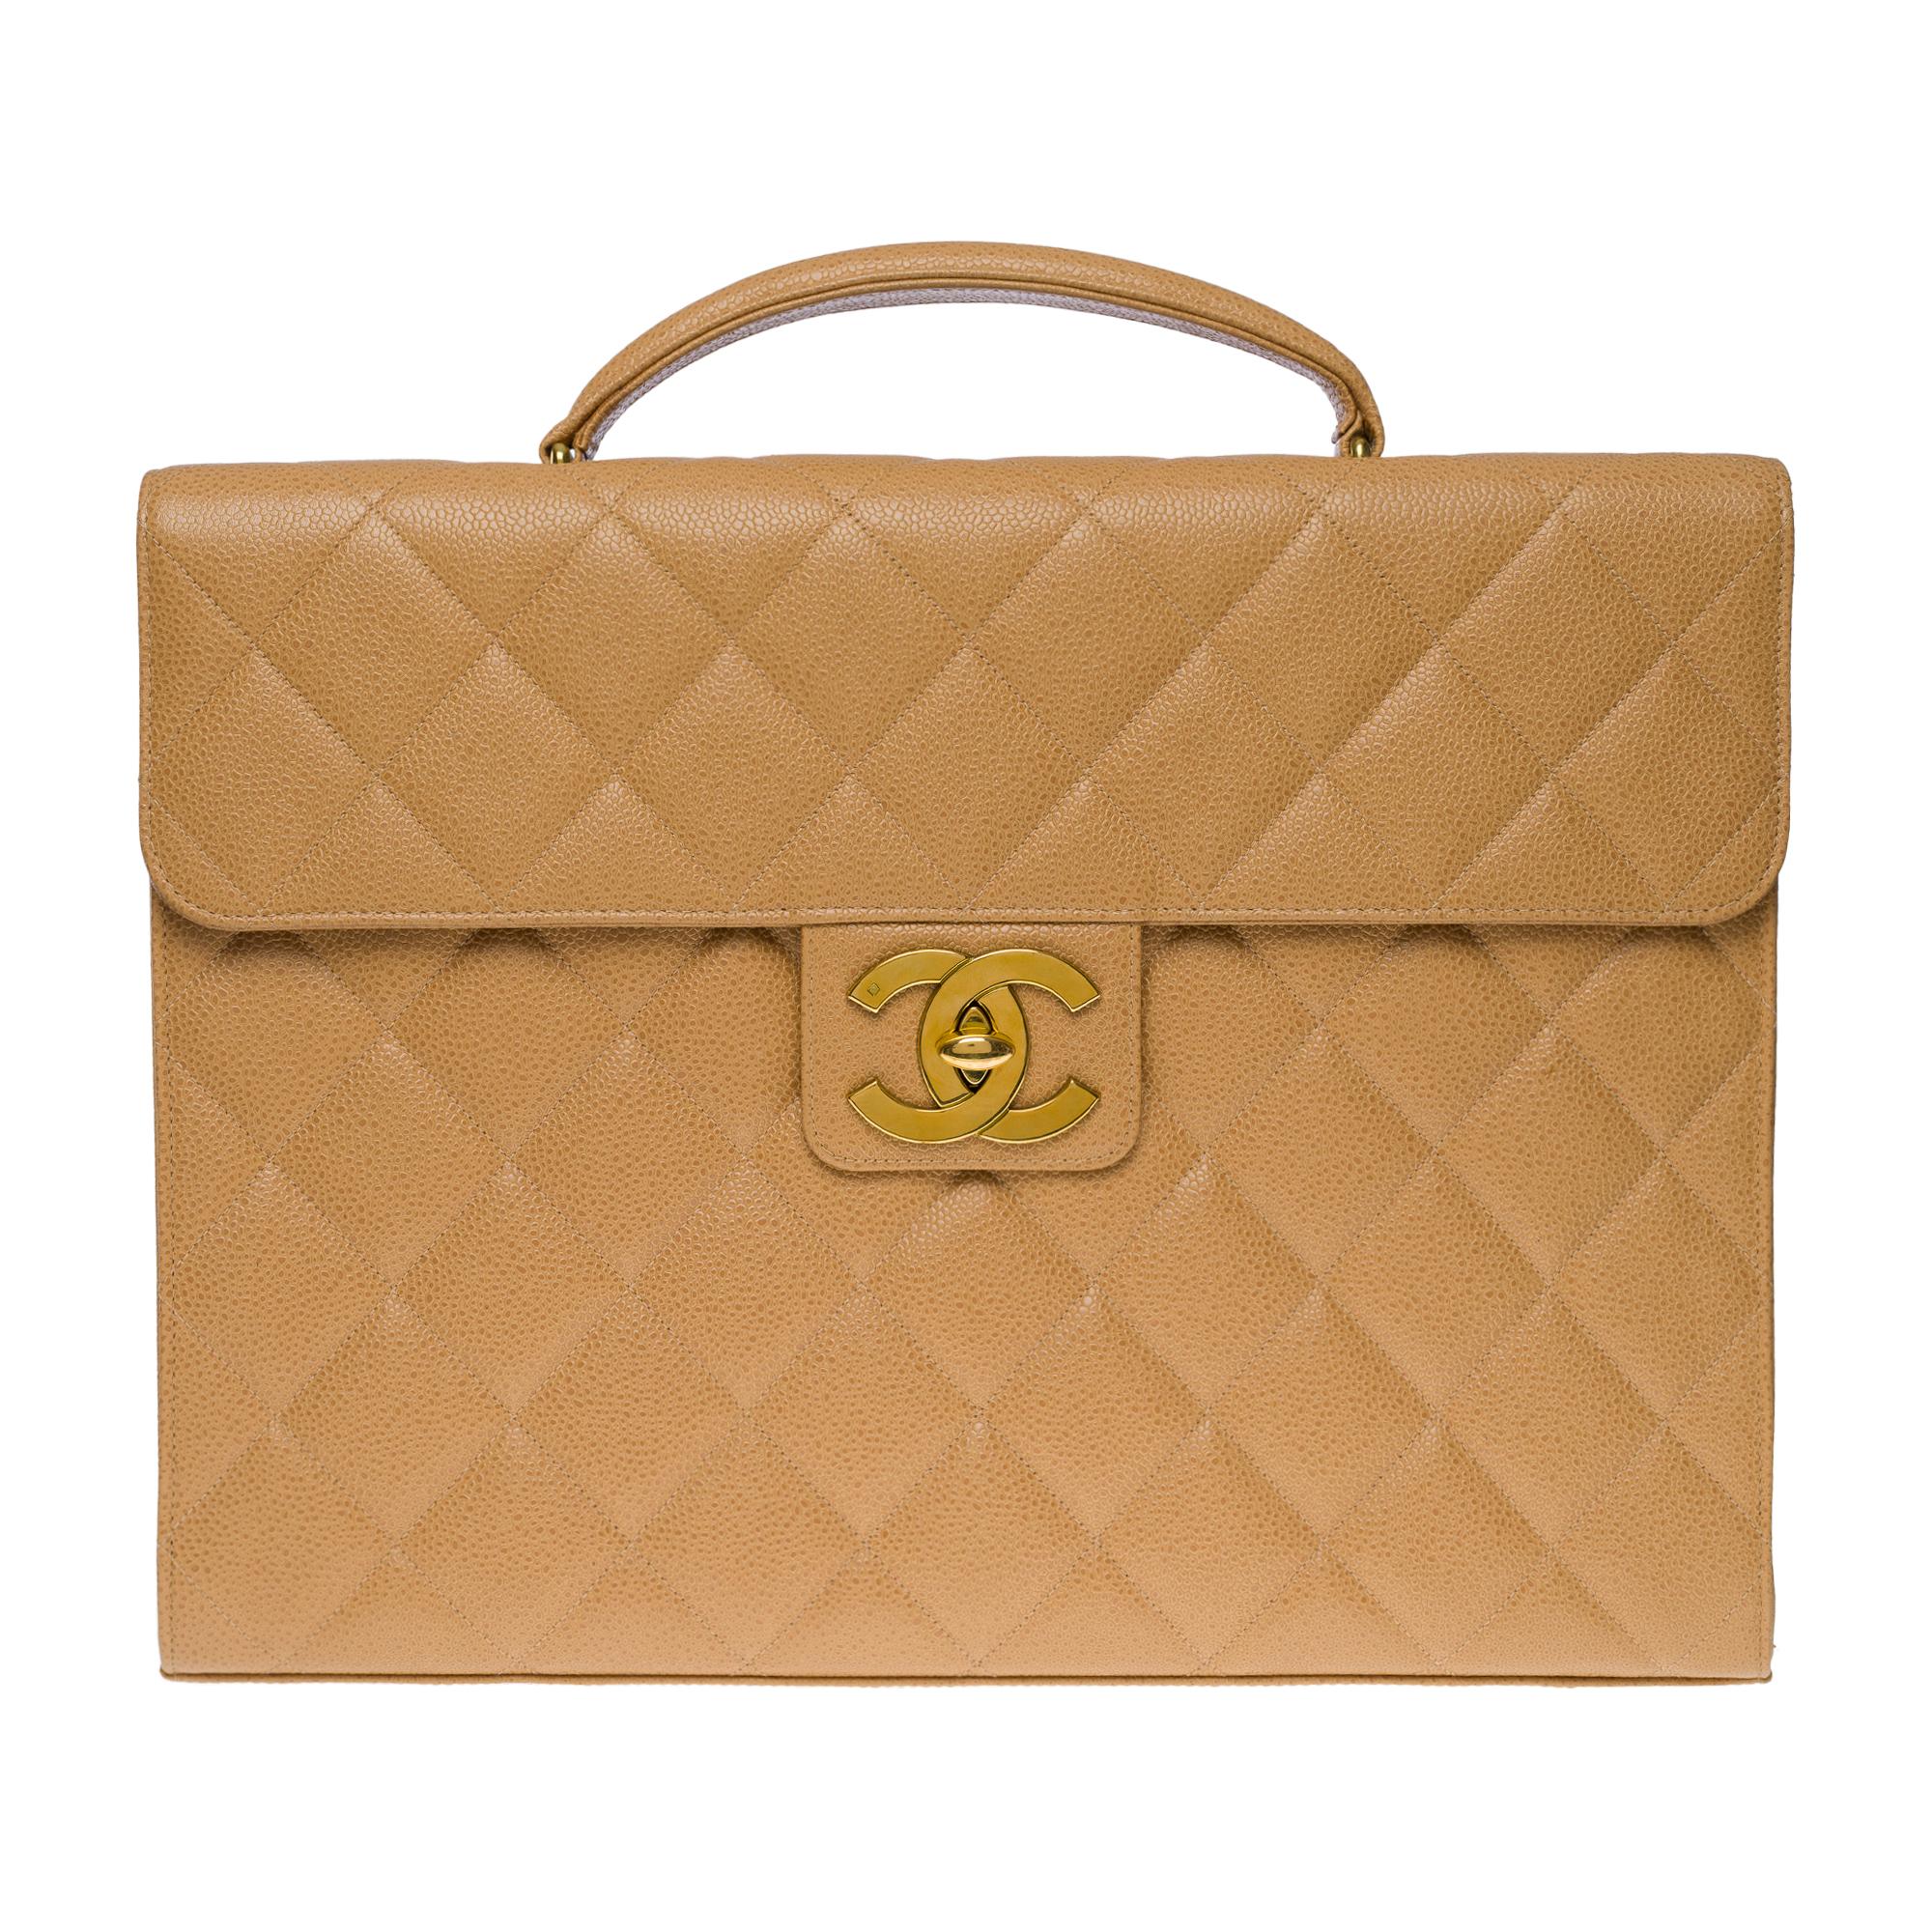 Classy Chanel Briefcase in beige caviar quilted leather, gold-plated metal hardware, a simple handle in beige caviar leather for a hand carry
Patch pocket on back of bag
Closure by flap, clasp with CC gold logo latch
Black leather lining, one fabric